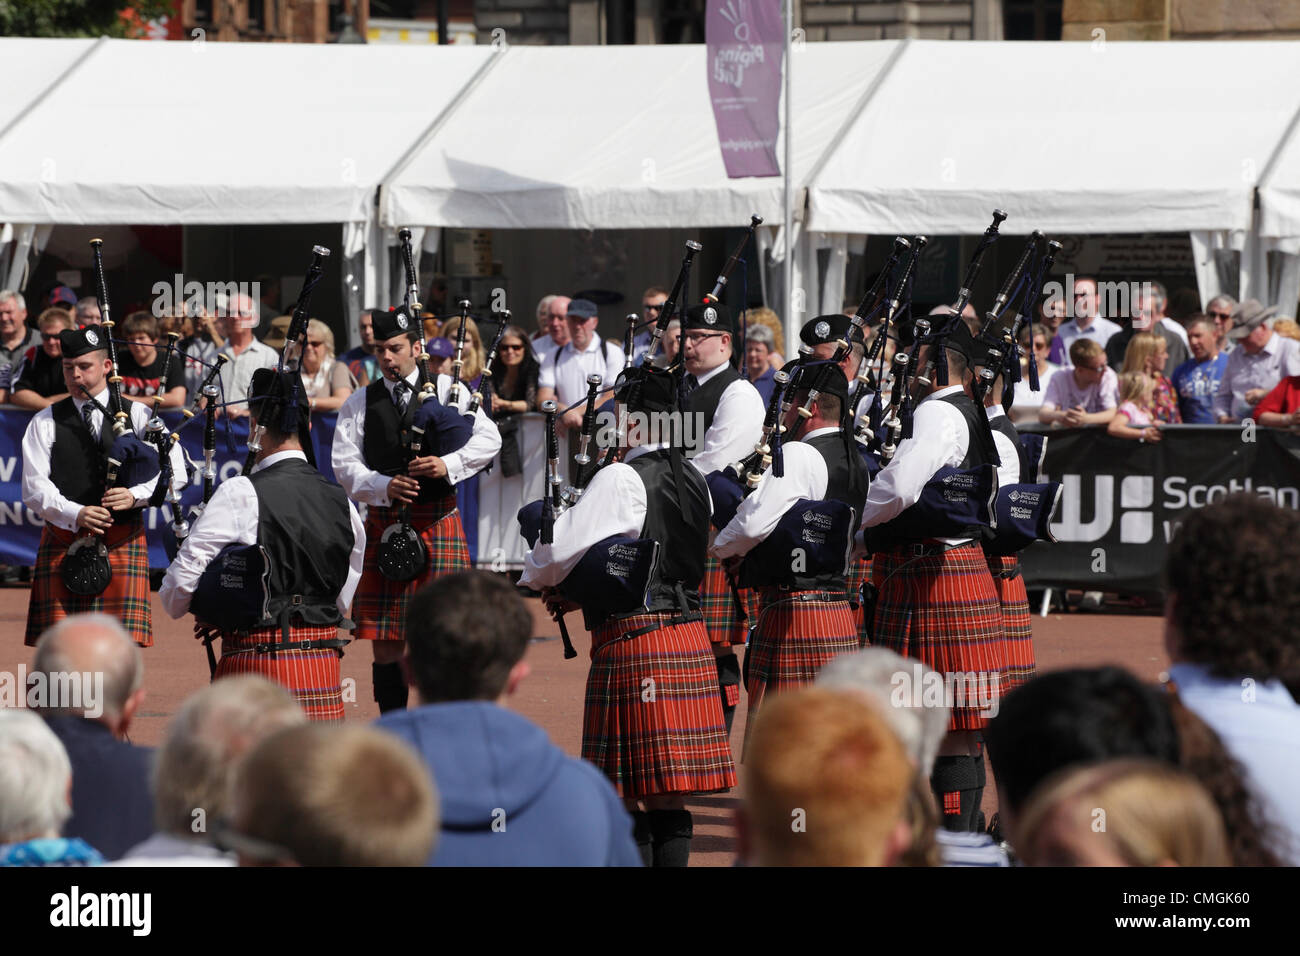 George Square, Glasgow city centre, Scotland, UK, Tuesday, 7th August, 2012. Strathclyde Police Pipe Band performing at the Piping Live Event Stock Photo